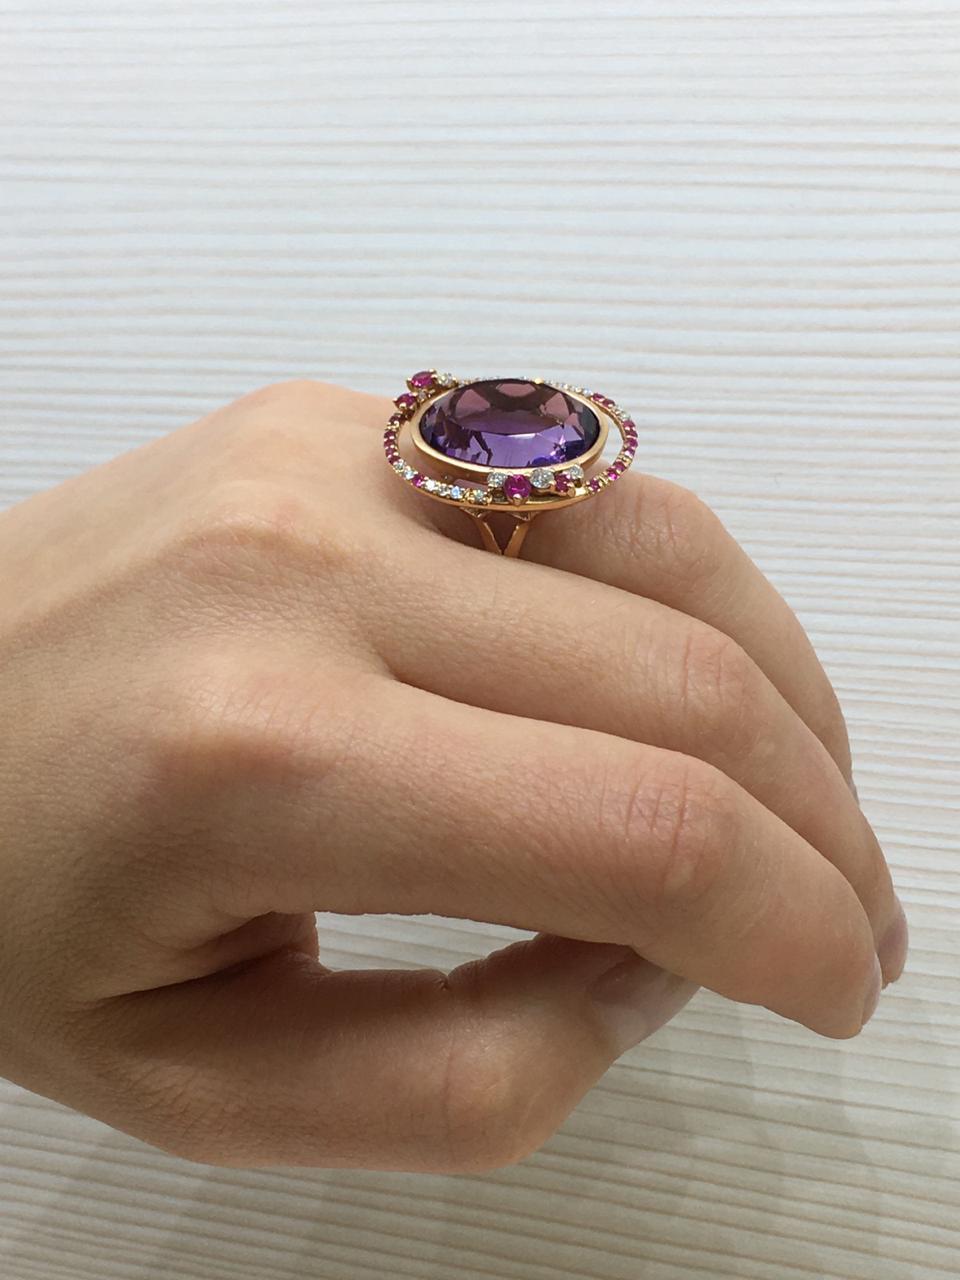 Fancy 14.5ct Purple Amethyst White Diamond Pink Sapphire 18 Karat Rose Gold Ring In New Condition For Sale In Montreux, CH